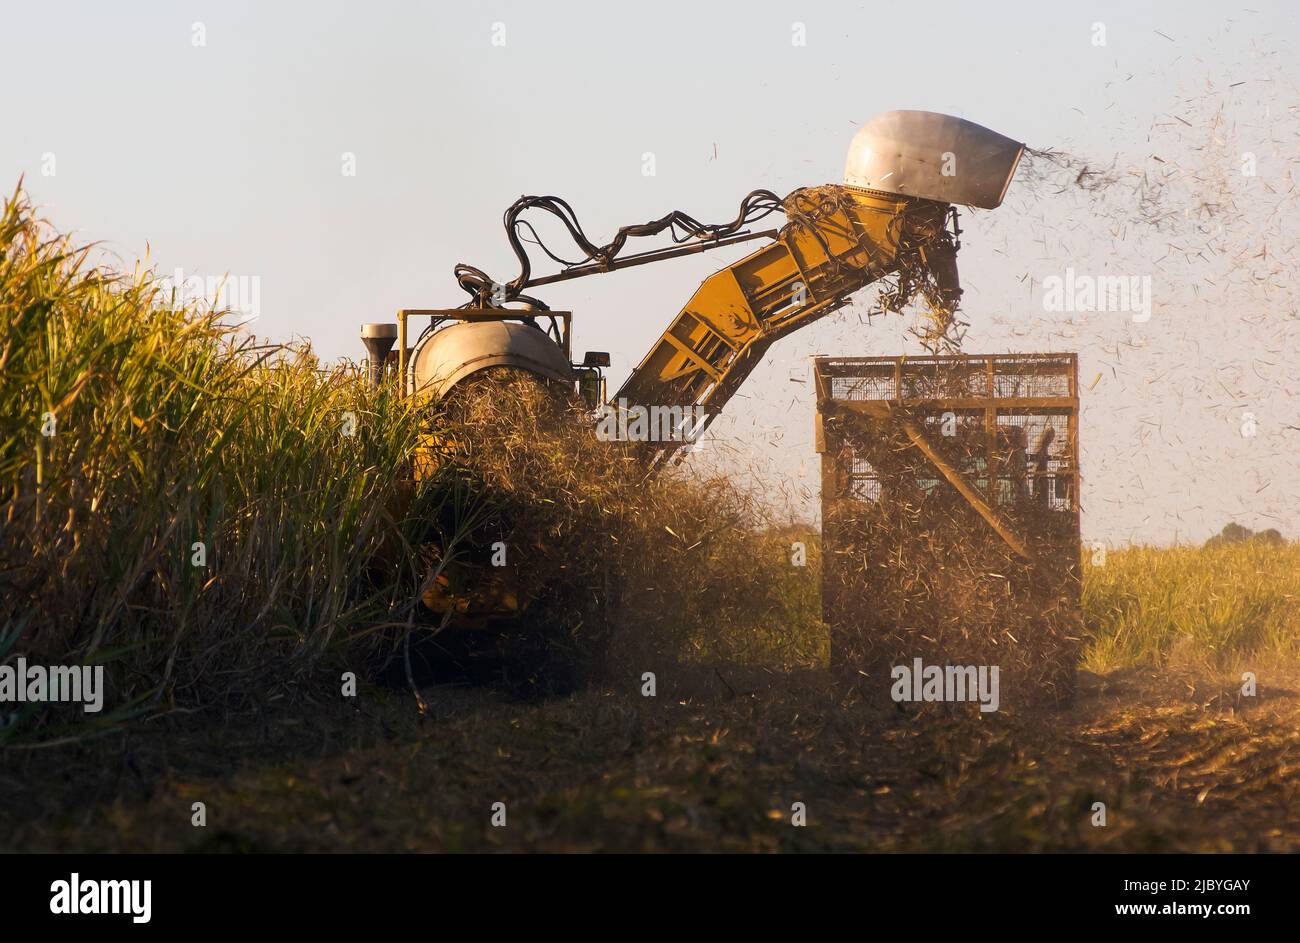 Heavy machinery harvesting mature sugarcane into mobile cage Stock Photo